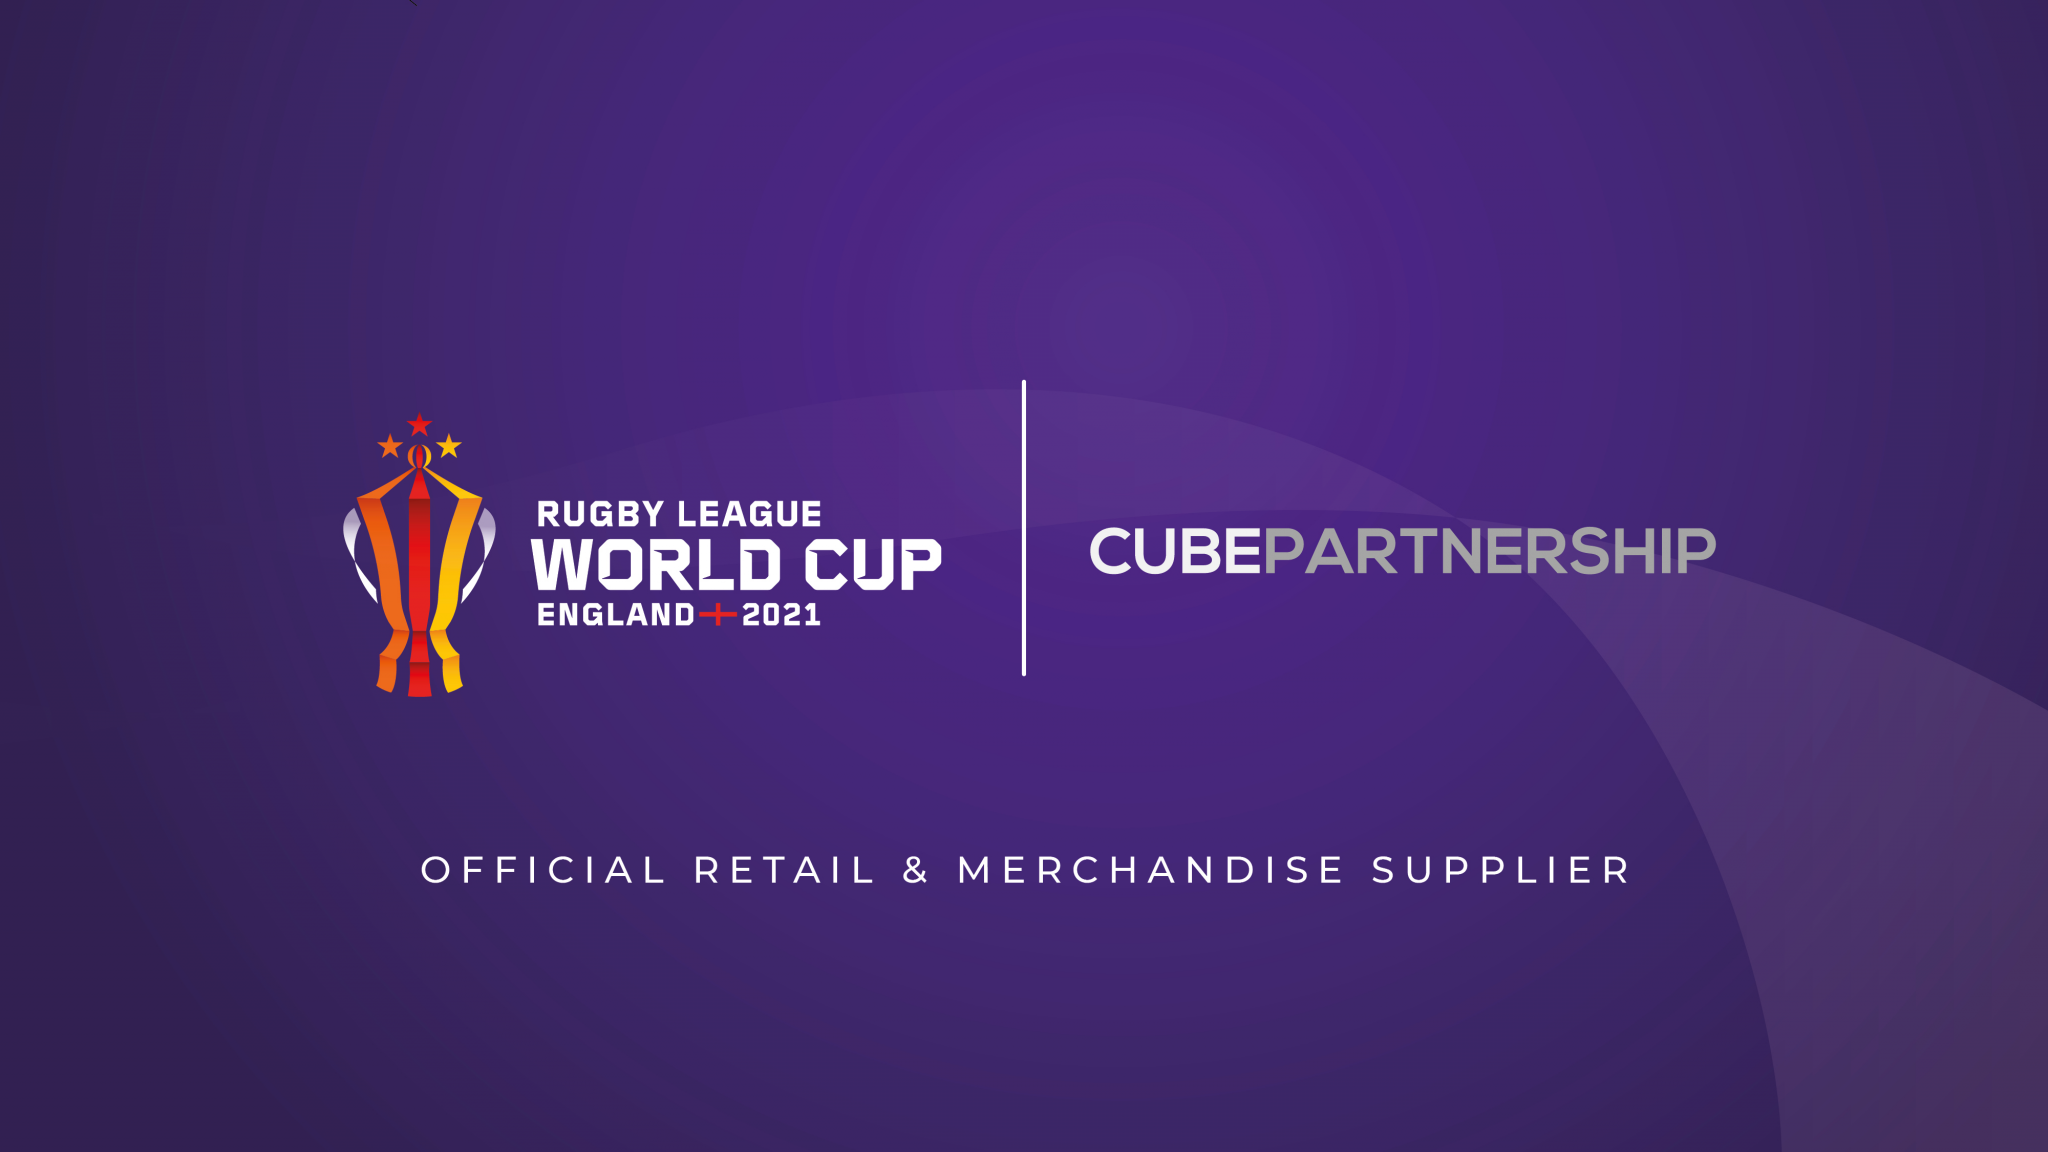 Cube Partnership will serve as the official retail and merchandise supplier ©RLWC2021